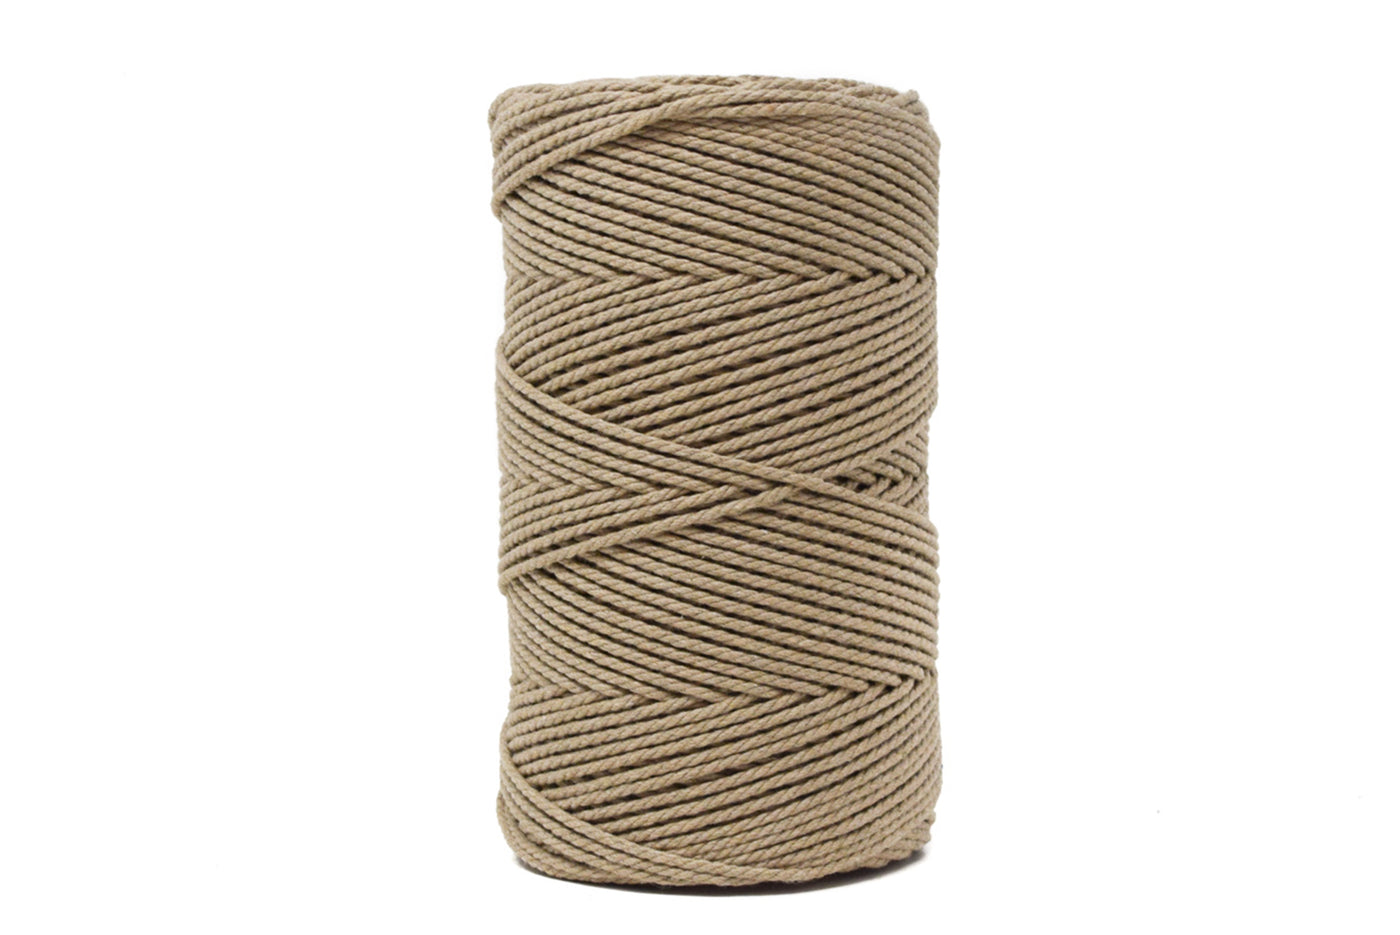 COTTON ROPE ZERO WASTE 2 MM - 3 PLY - SAND COLOR